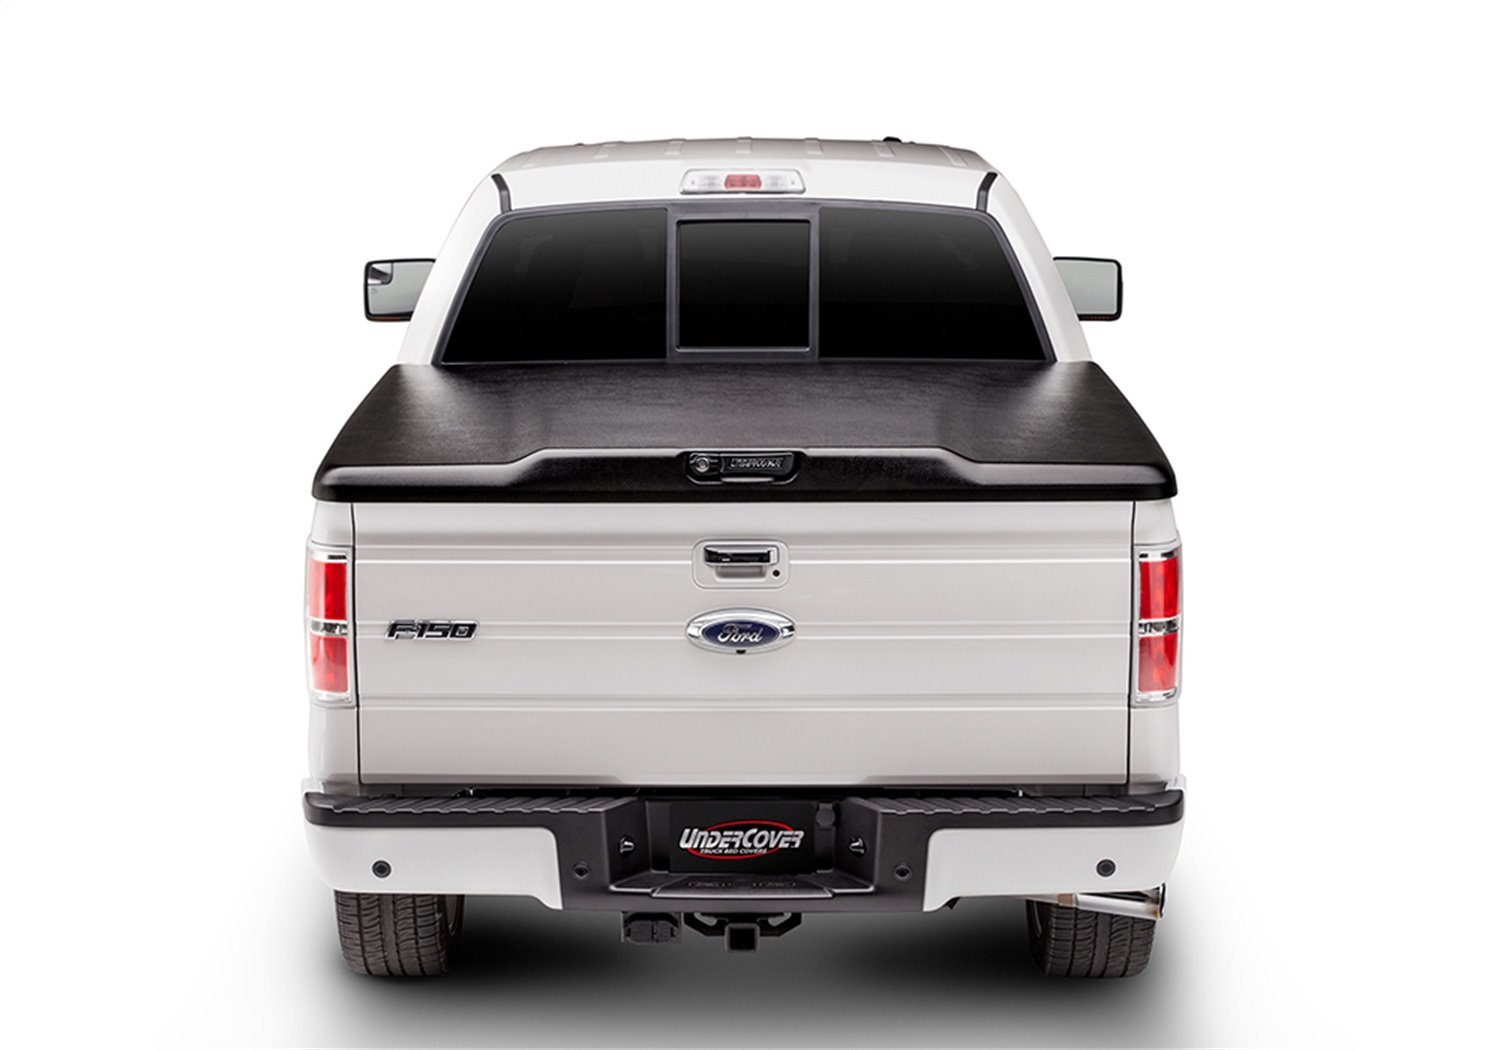 UC2218 Elite Hard Non-Folding Cover, Fits Select Ford F-150 6'7" Bed STD/EXT/Crew, Black Textured